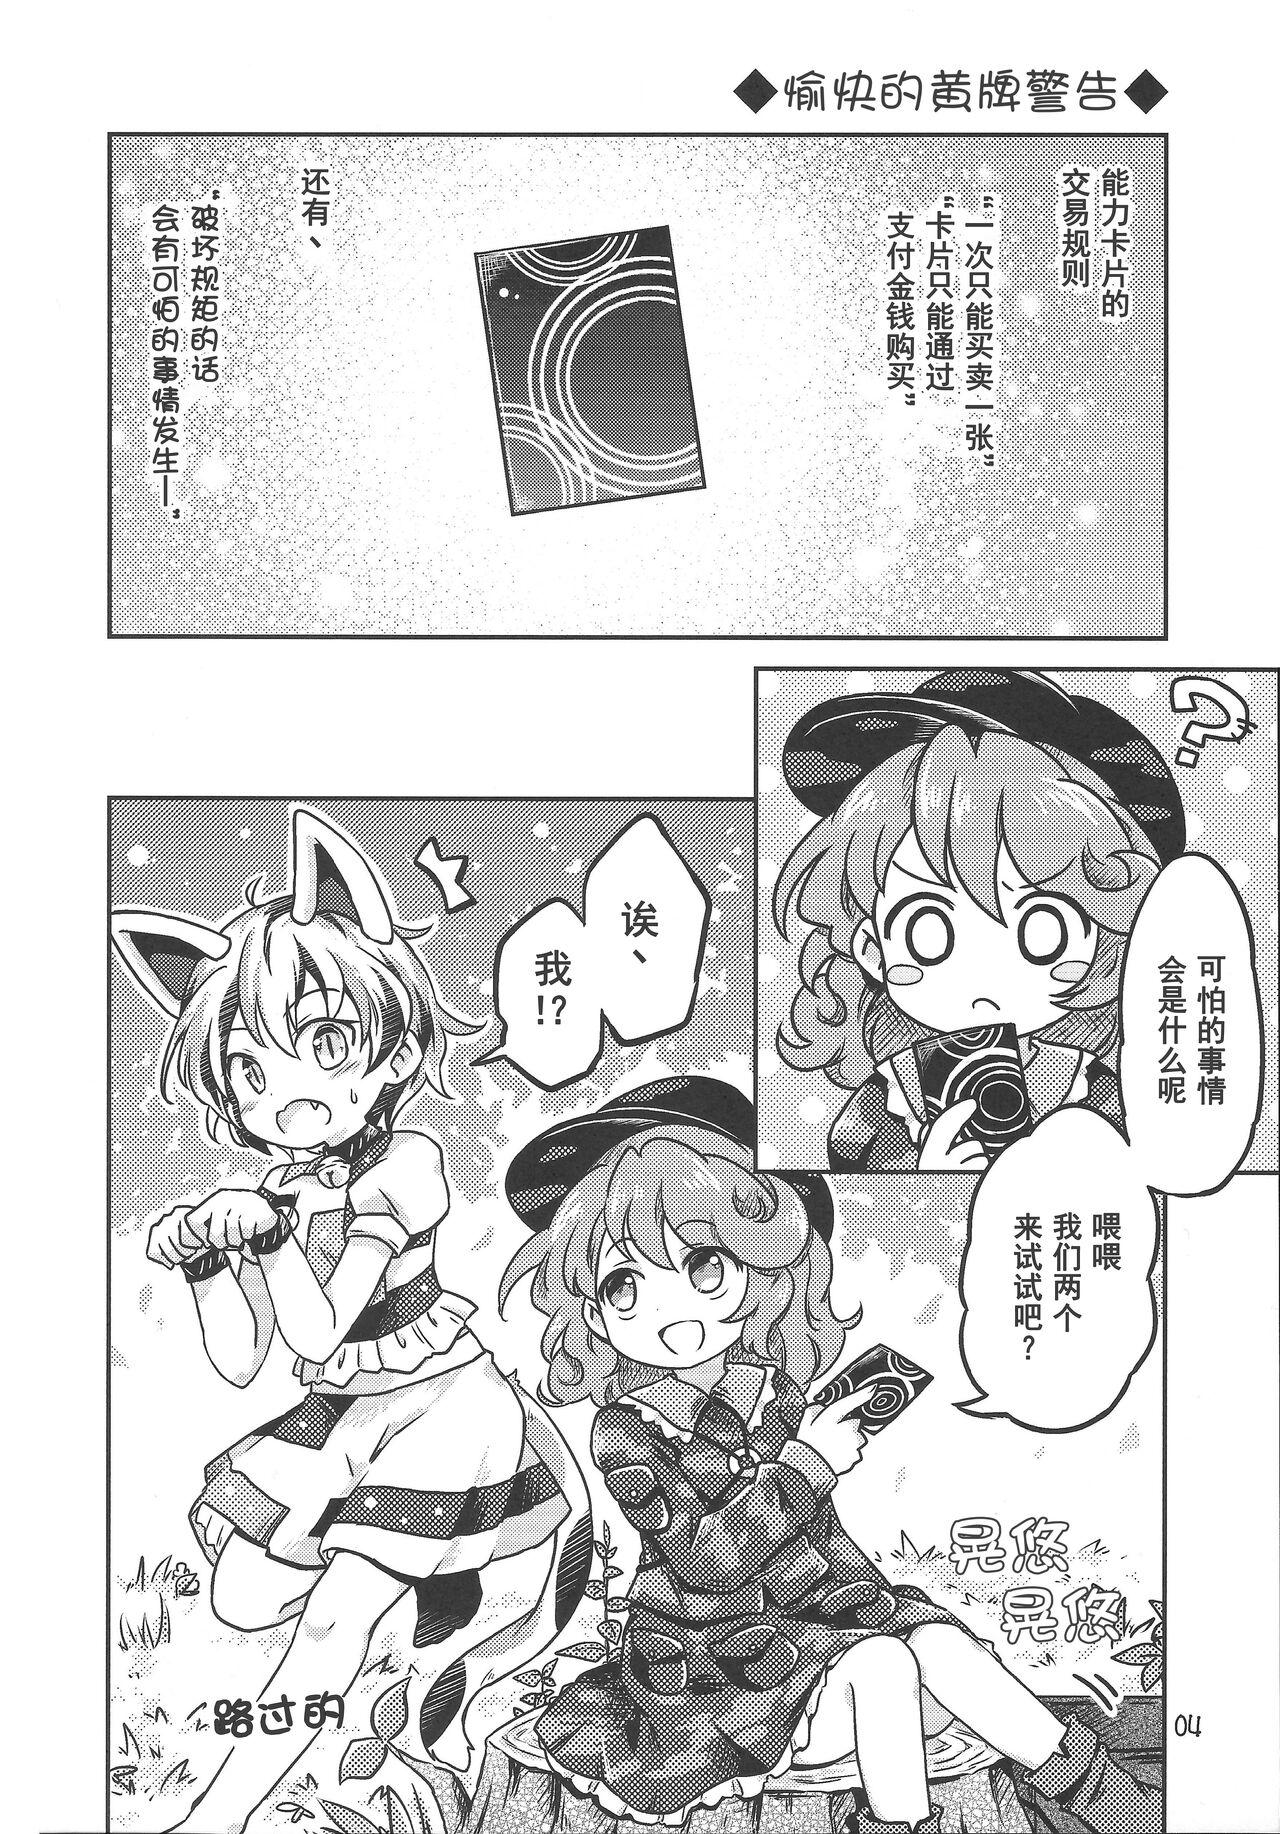 Whatsapp 《千亦酱的活动日志》 - Touhou project Sologirl - Page 4